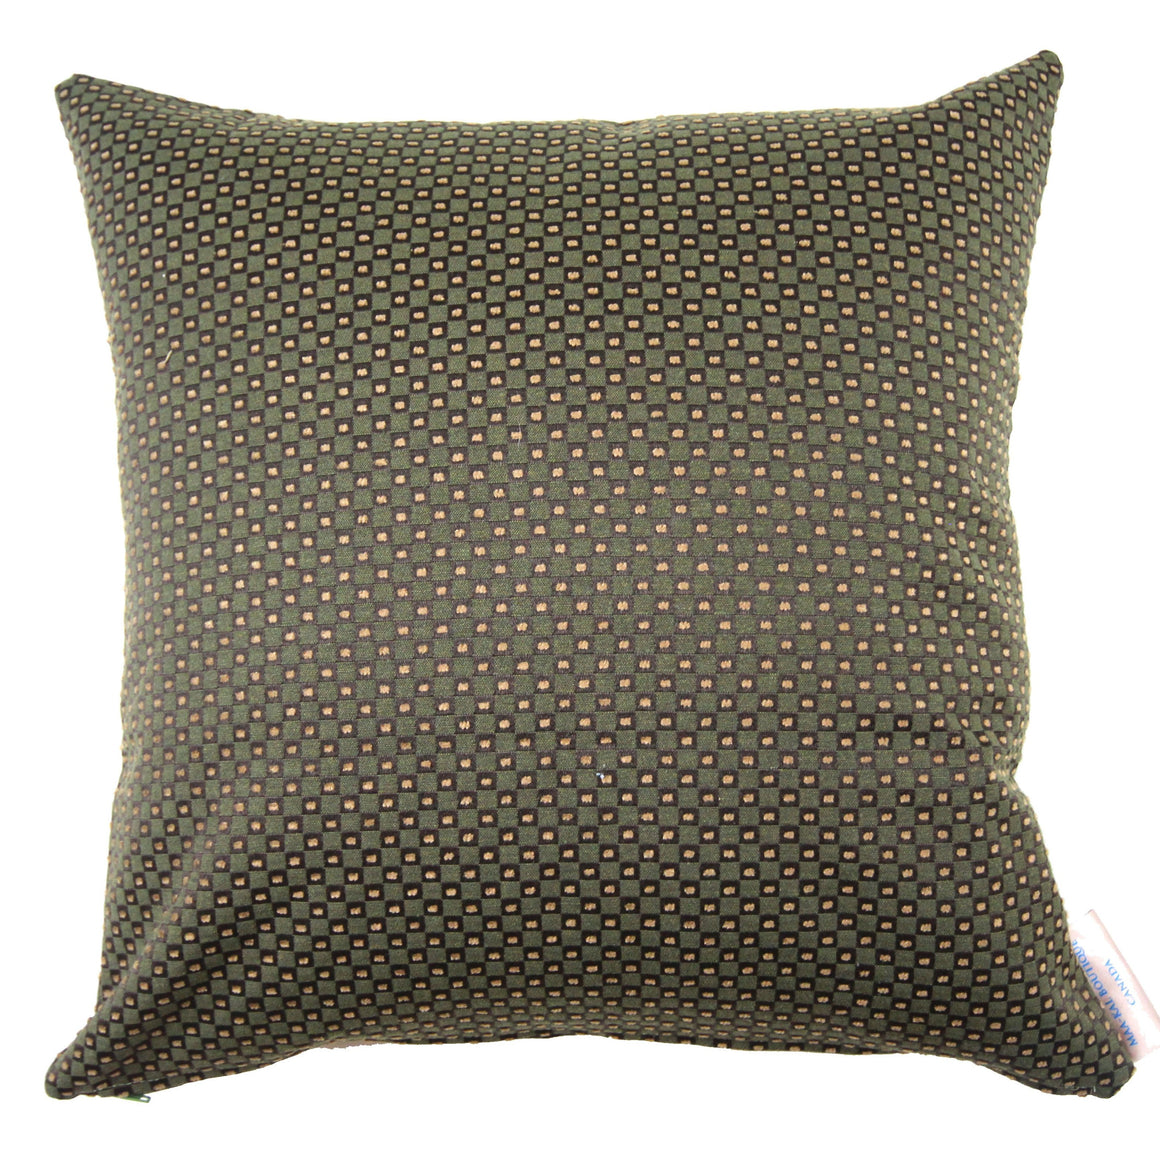 Bridget - Green Dotted Decorative Pillow Cover- 17x17 - Maa-Kal Boutique Canada